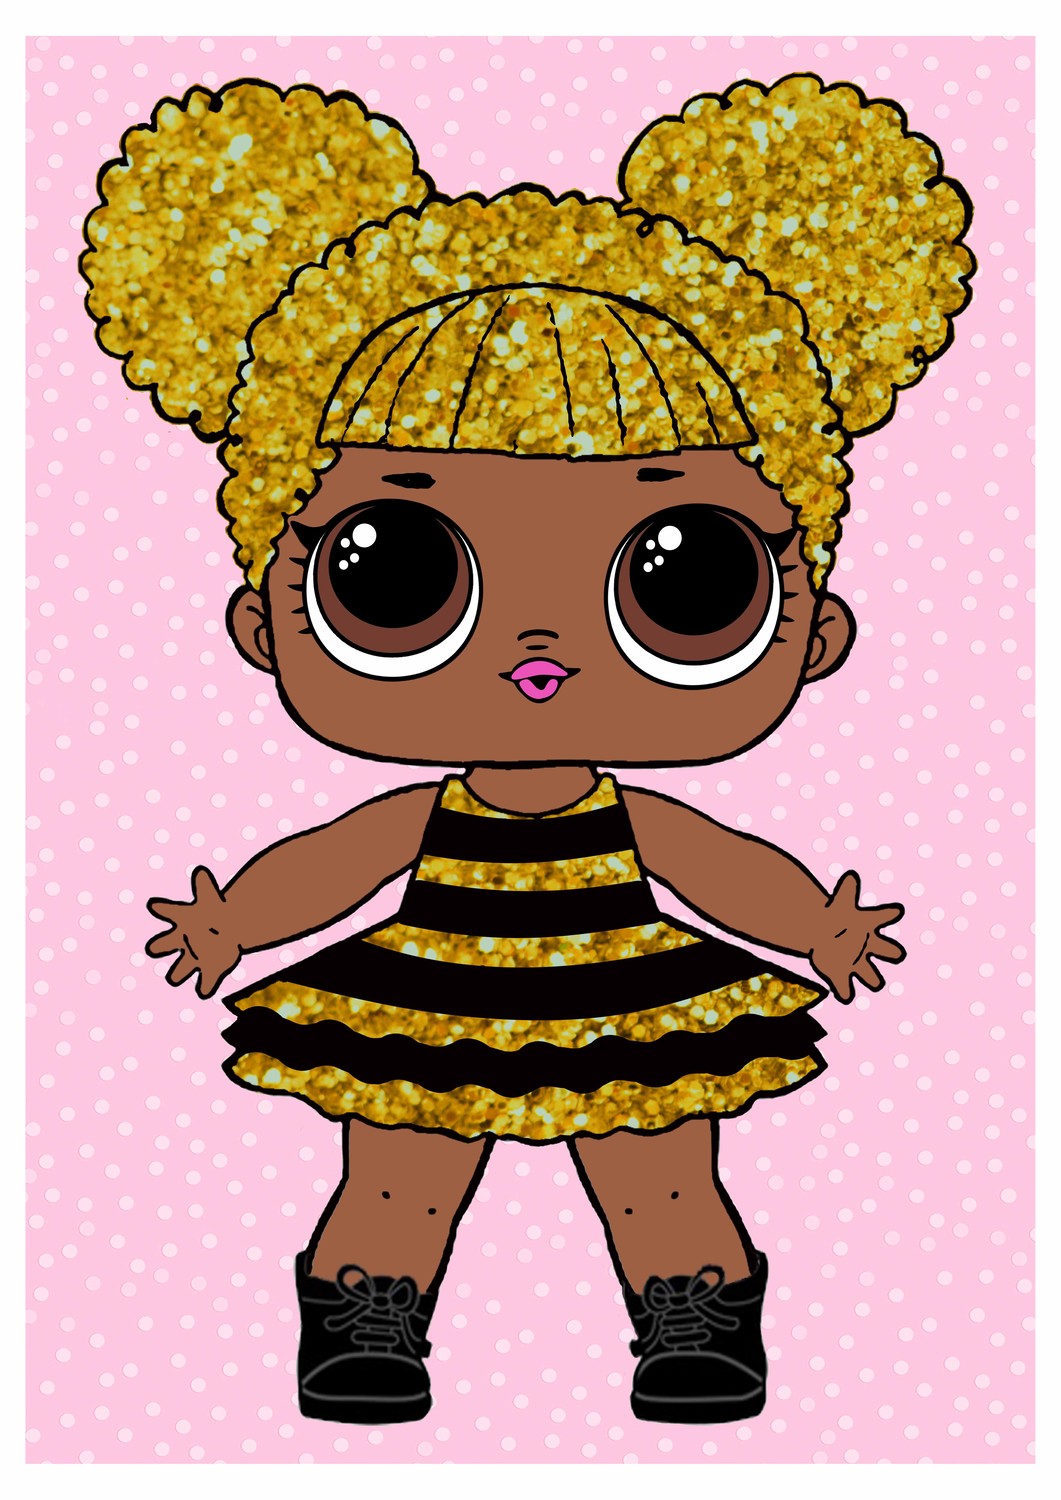 LOL Surprise Queen Bee Free Printable Posters. - Oh My Fiesta! in english